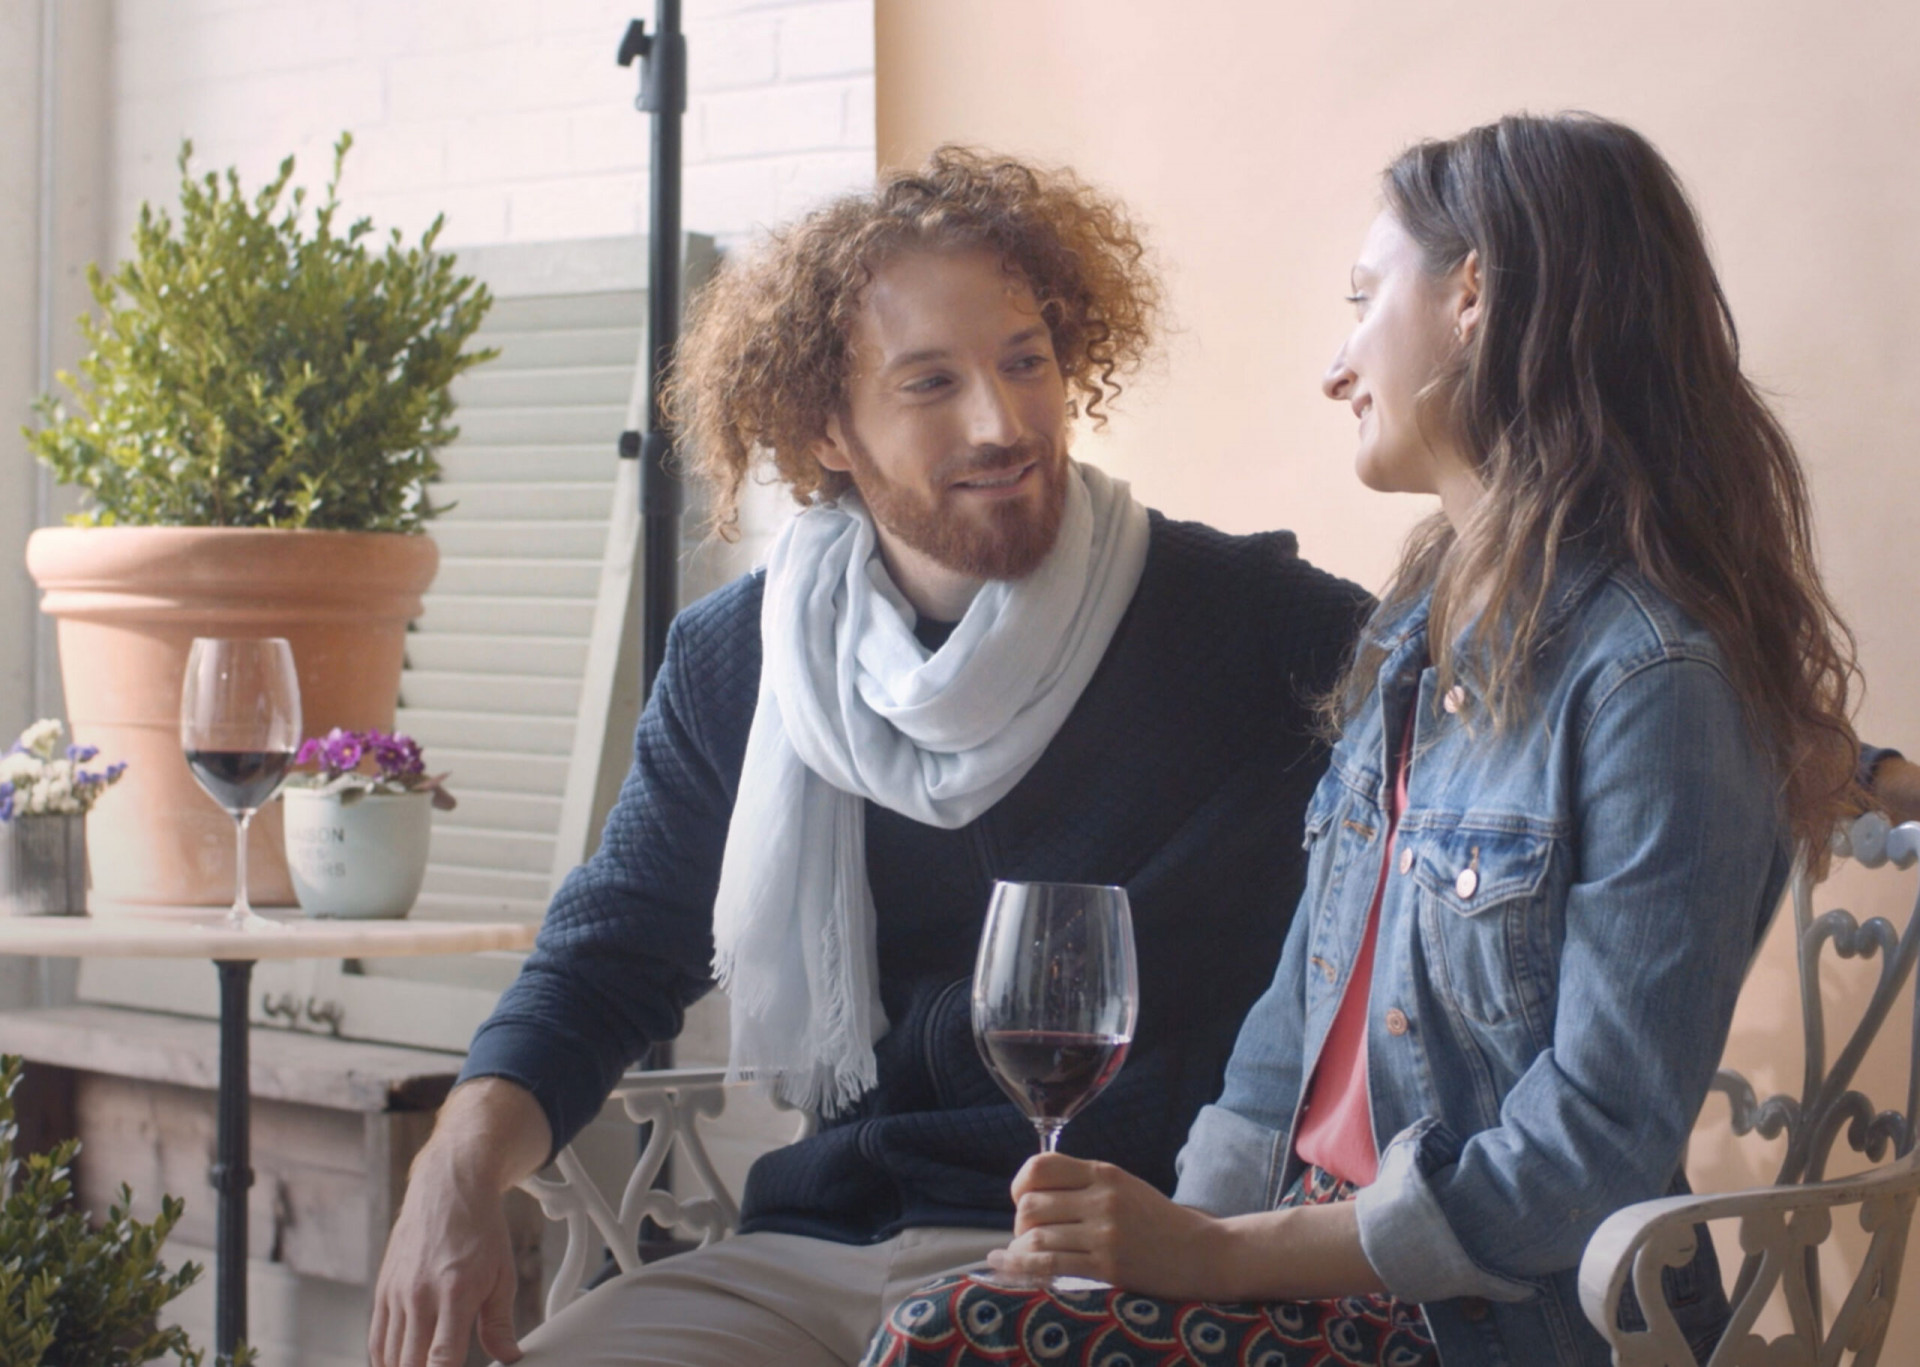 Arterra Wines - A campaign with good taste